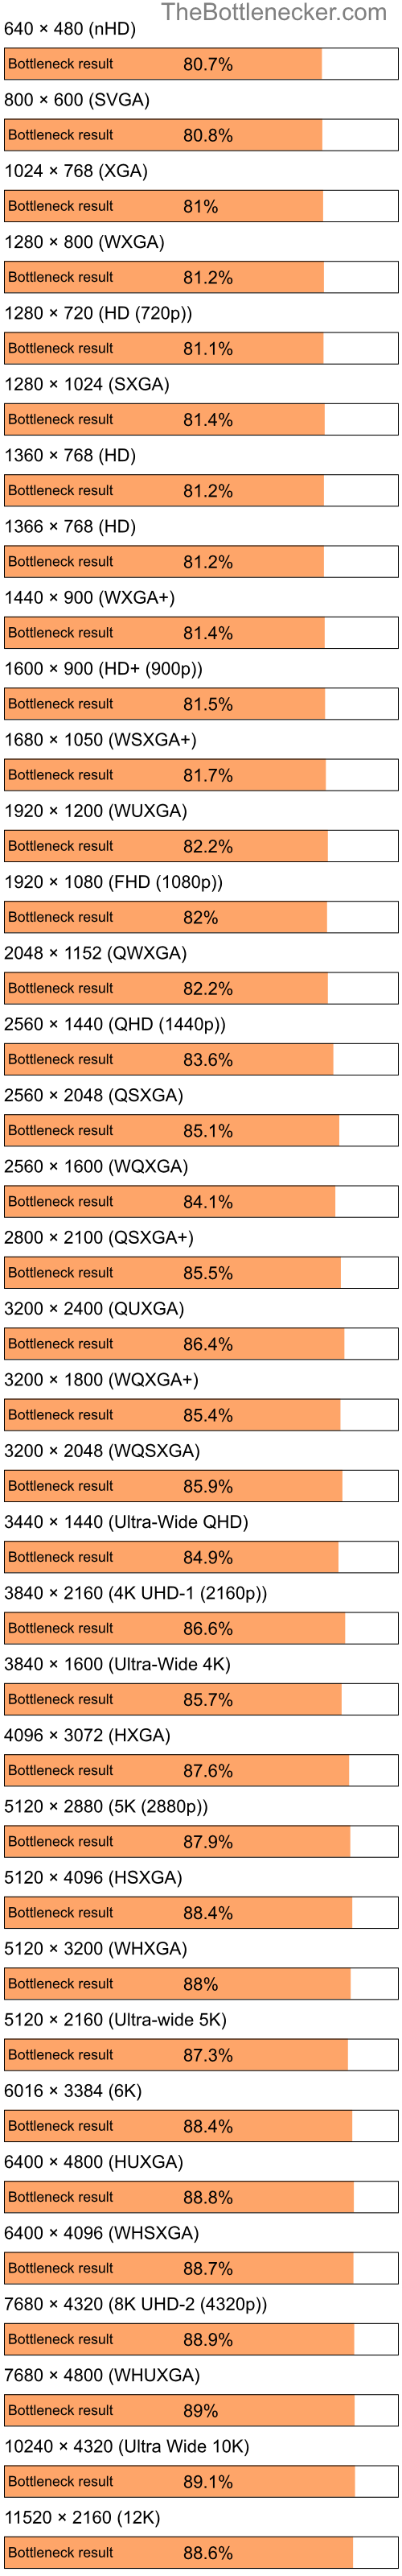 Bottleneck results by resolution for Intel Pentium 4 and NVIDIA GeForce 7100 in Graphic Card Intense Tasks